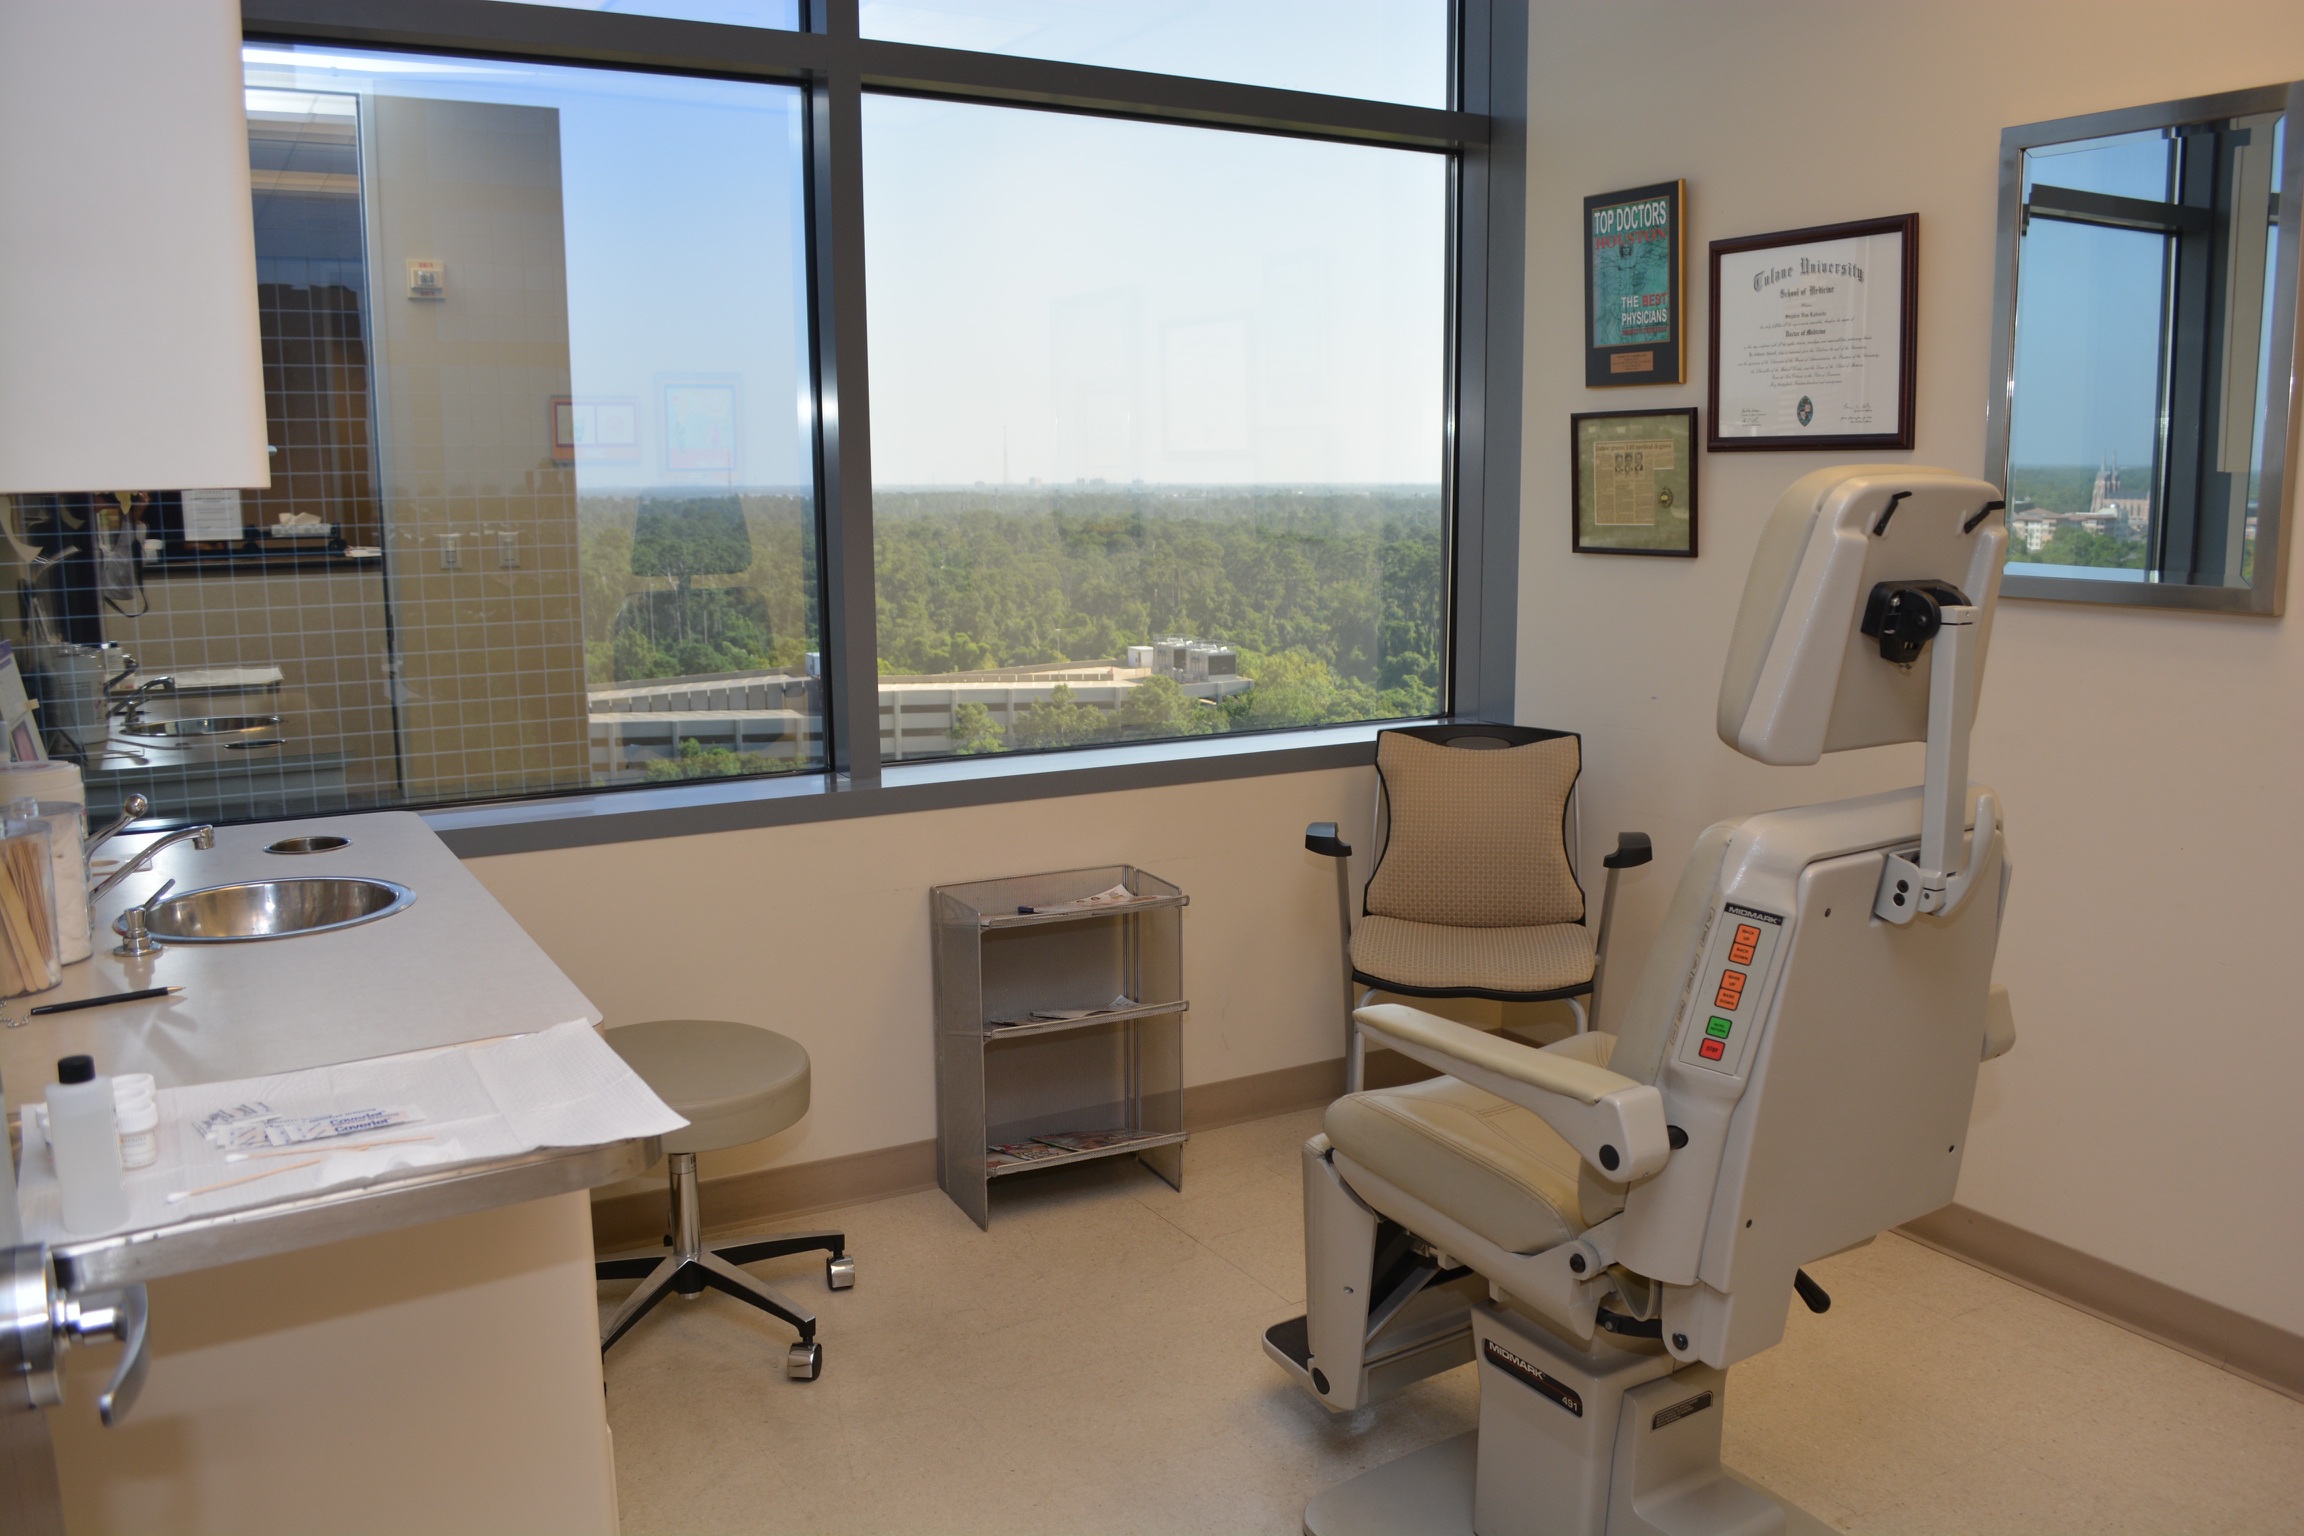 Patient exam room with chairs and dermatology